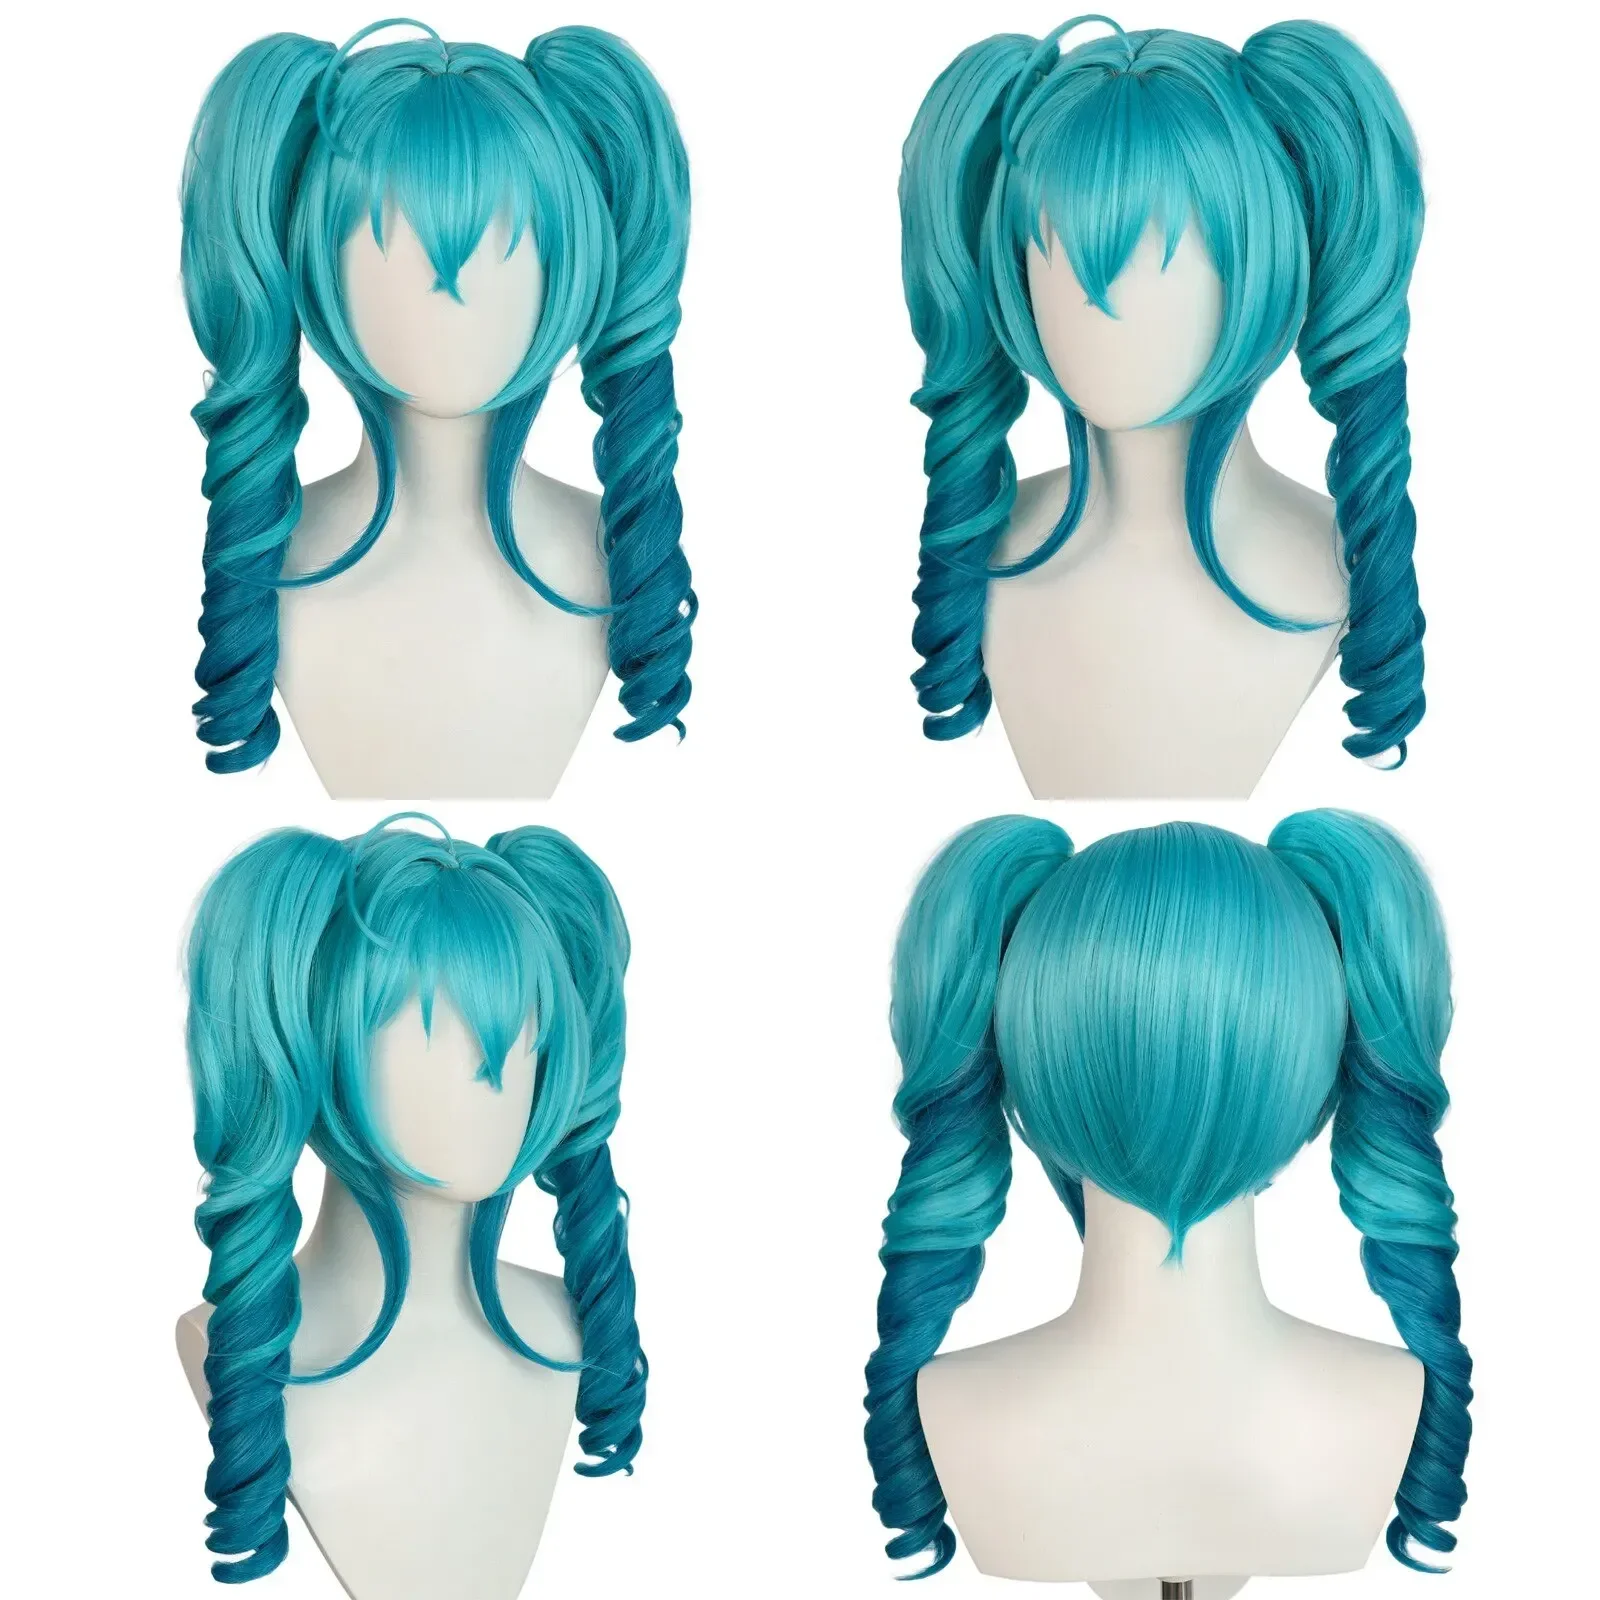 

18"inch Harajuku Blue Mixed Curly Hatsune Miku Cosplay Wig with Double Ponytail for Halloween Christmas Costume Wigs